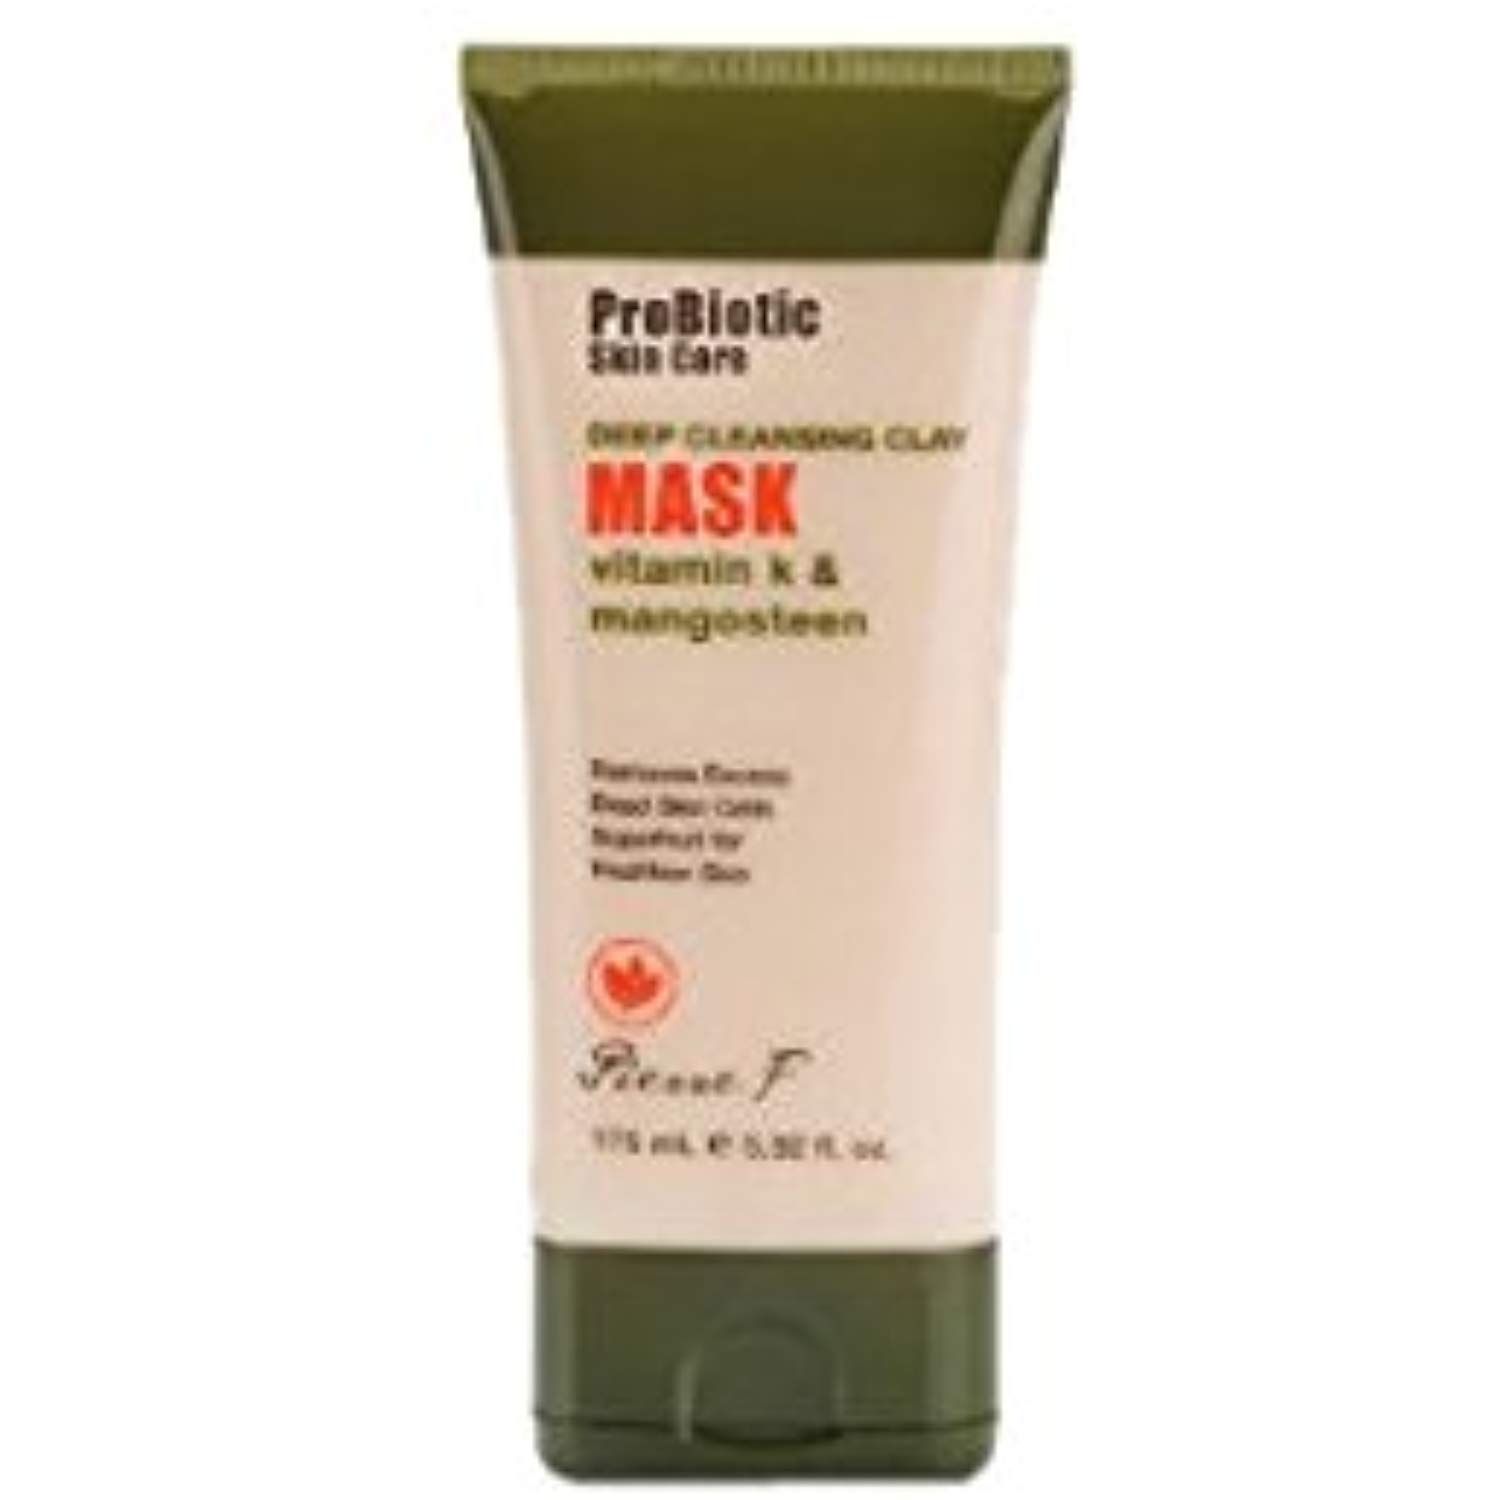 Pierre F ProBiotic Deep Cleansing Clay Mask, 5.92 Ounce * To view ...